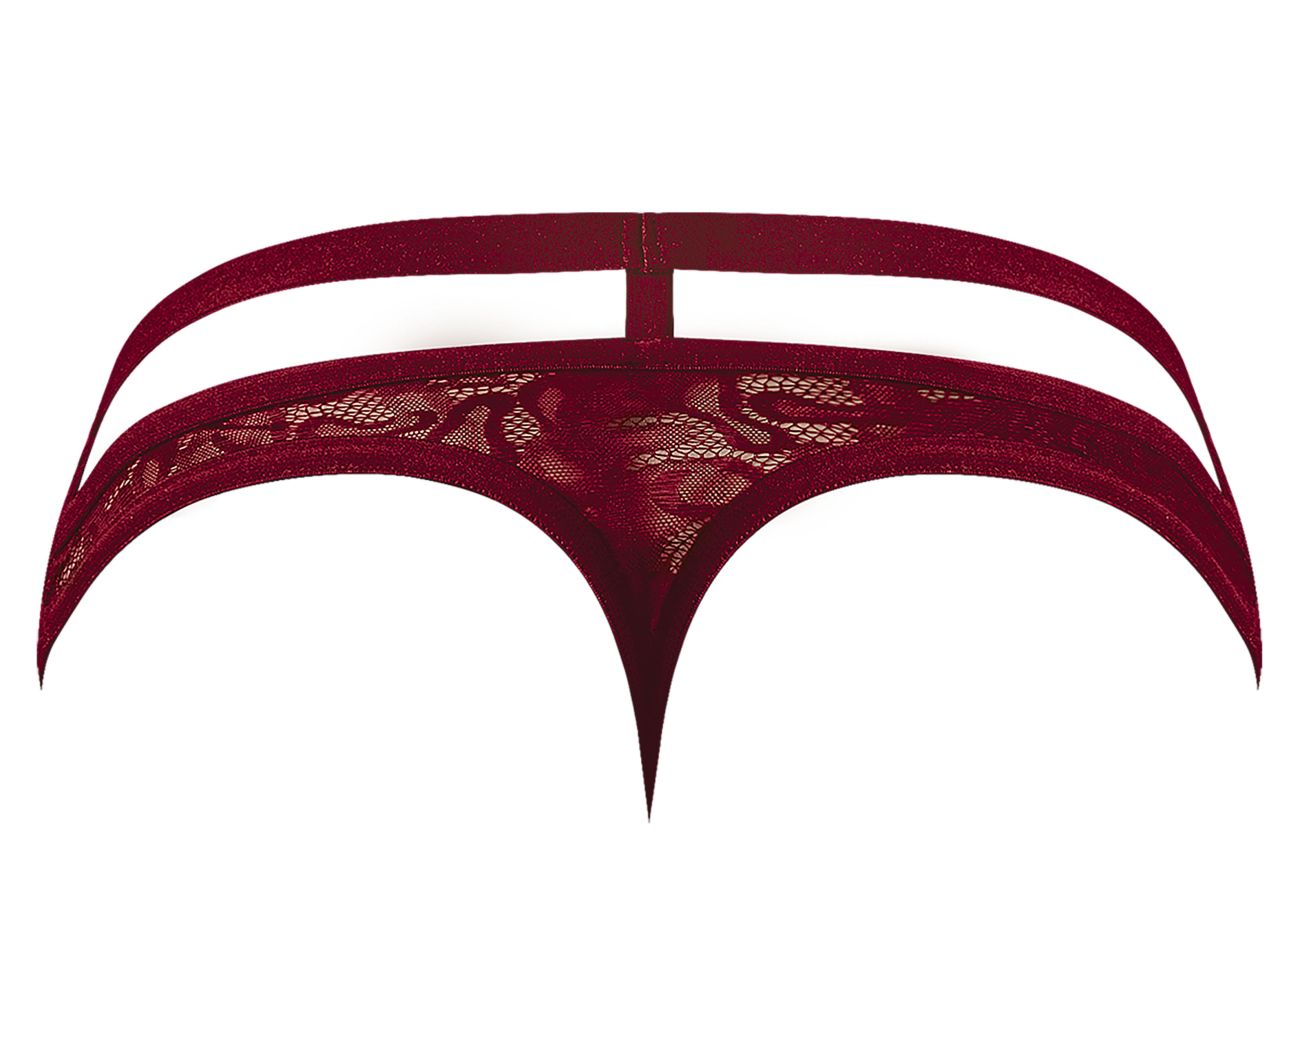 Male Power 446-289 Lucifer Cut Out Strappy Thong Burgundy